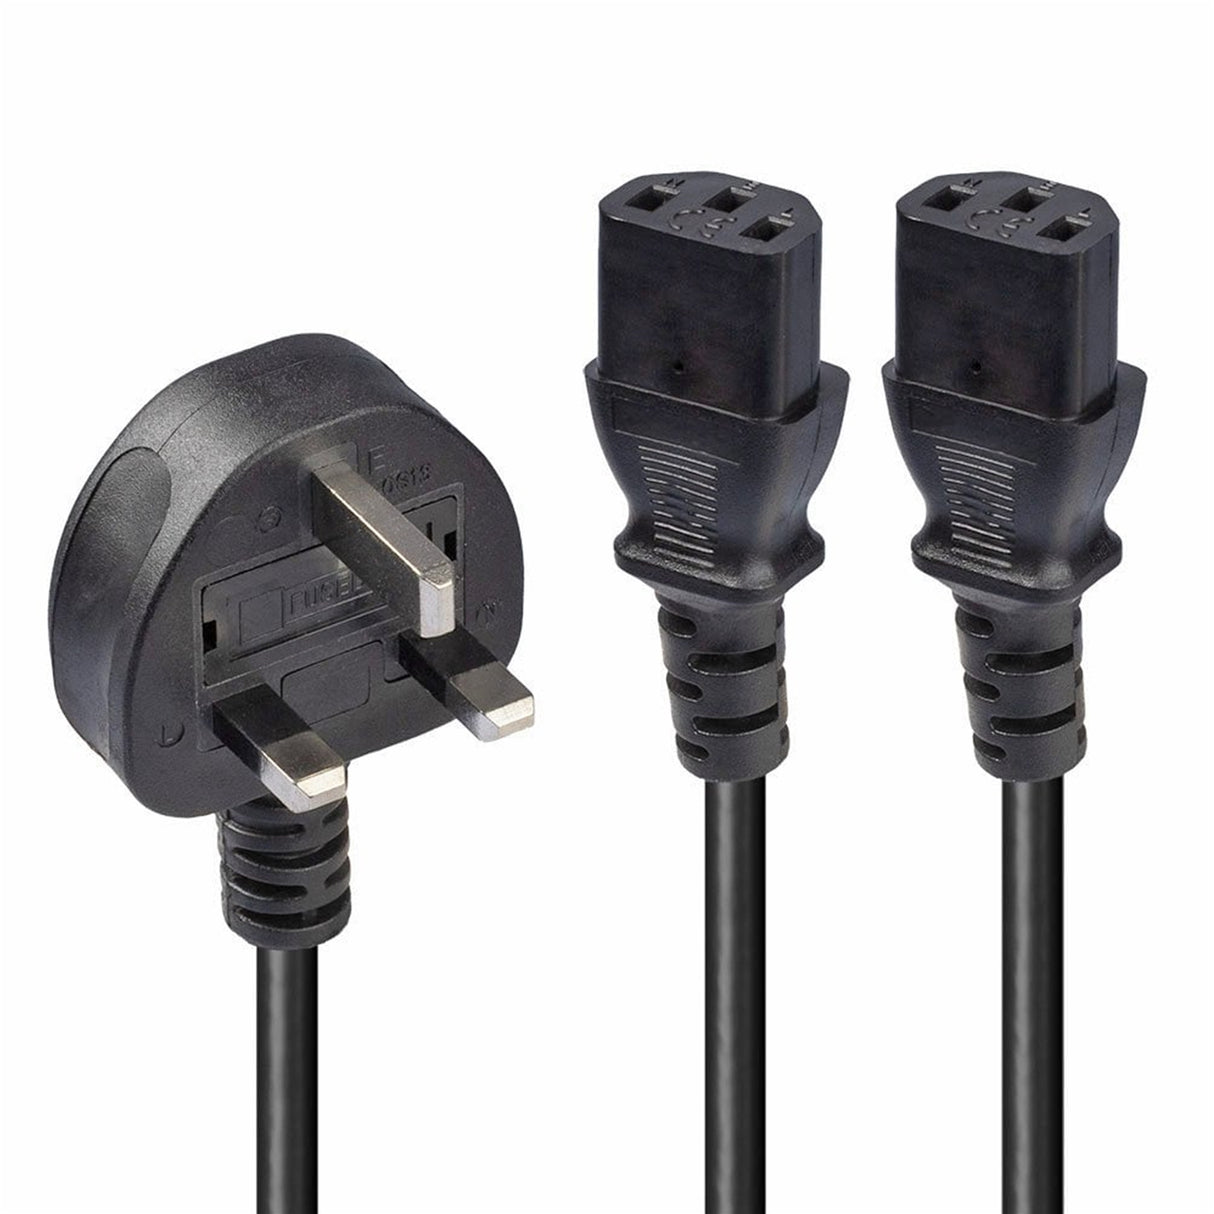 LINDY 30371 2.5m UK 3 Pin Plug to 2 x IEC C13 Splitter Extension Cable, Black, Fully moulded, fused at 13A, 10 year warranty